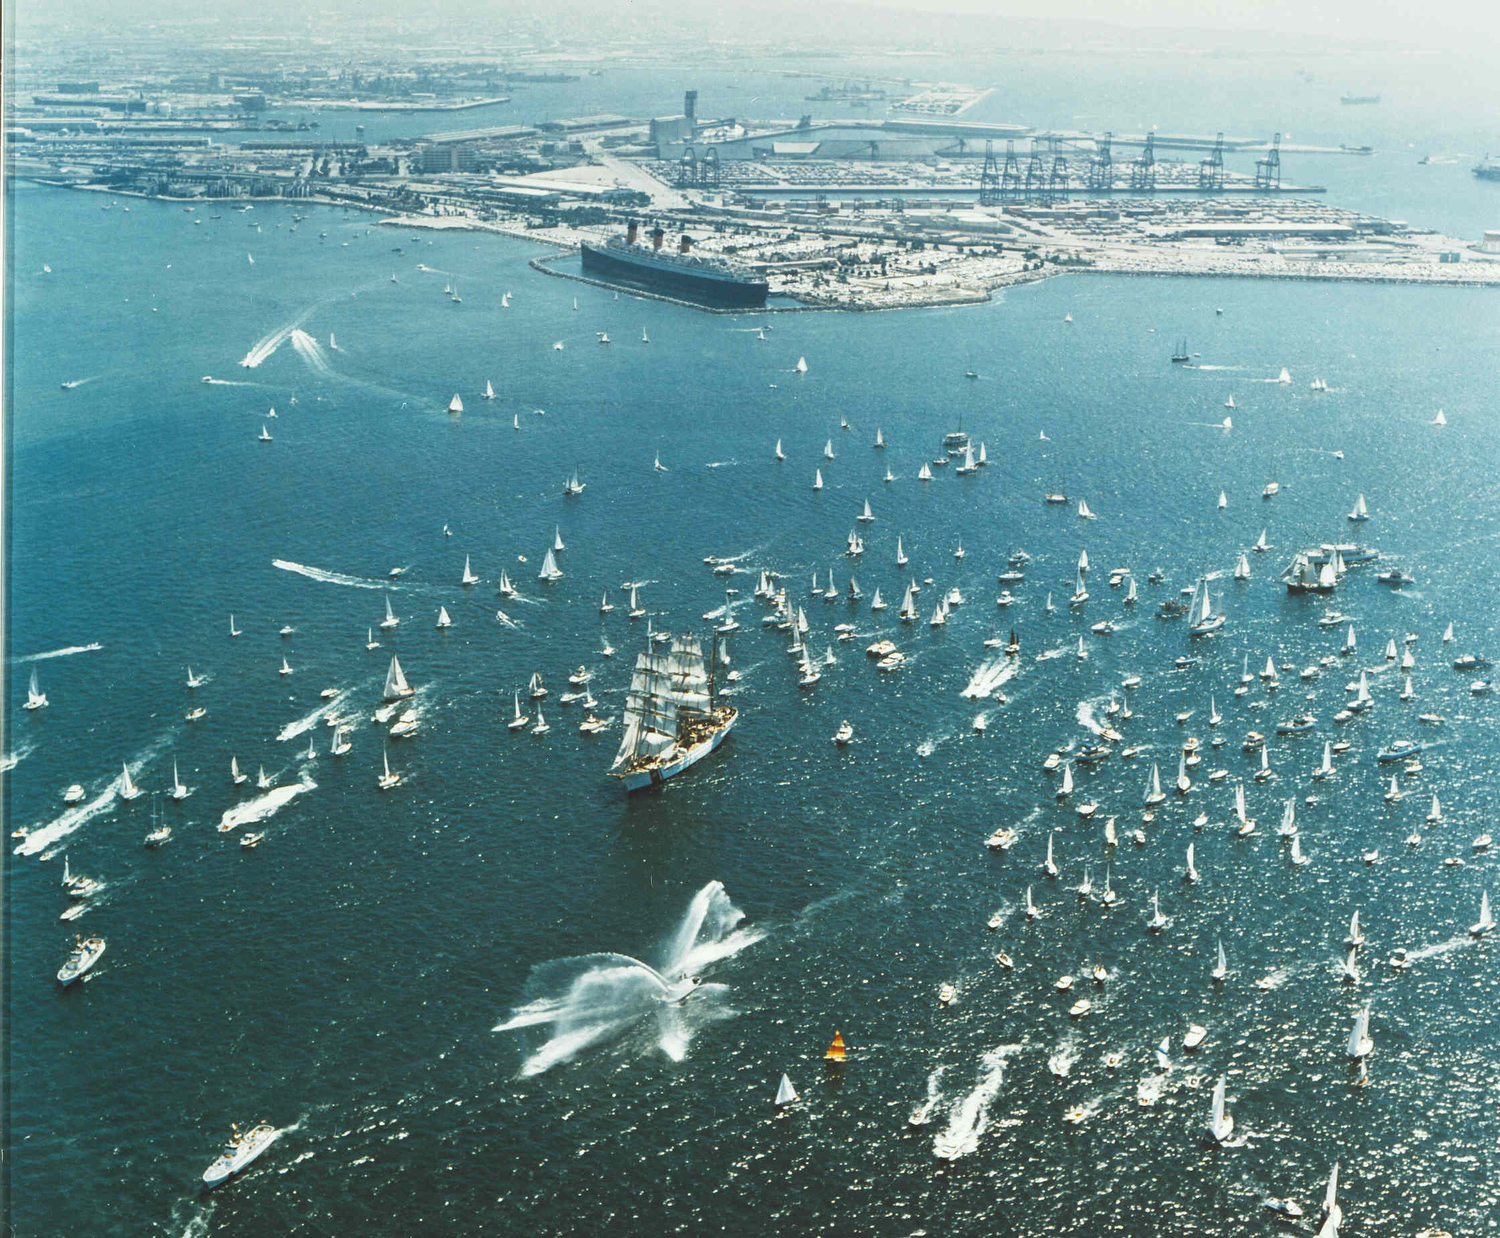 The tall ship Eagle is greeted by a flotilla of pleasure craft and other vessels during bicentennial celebrations in 1976.